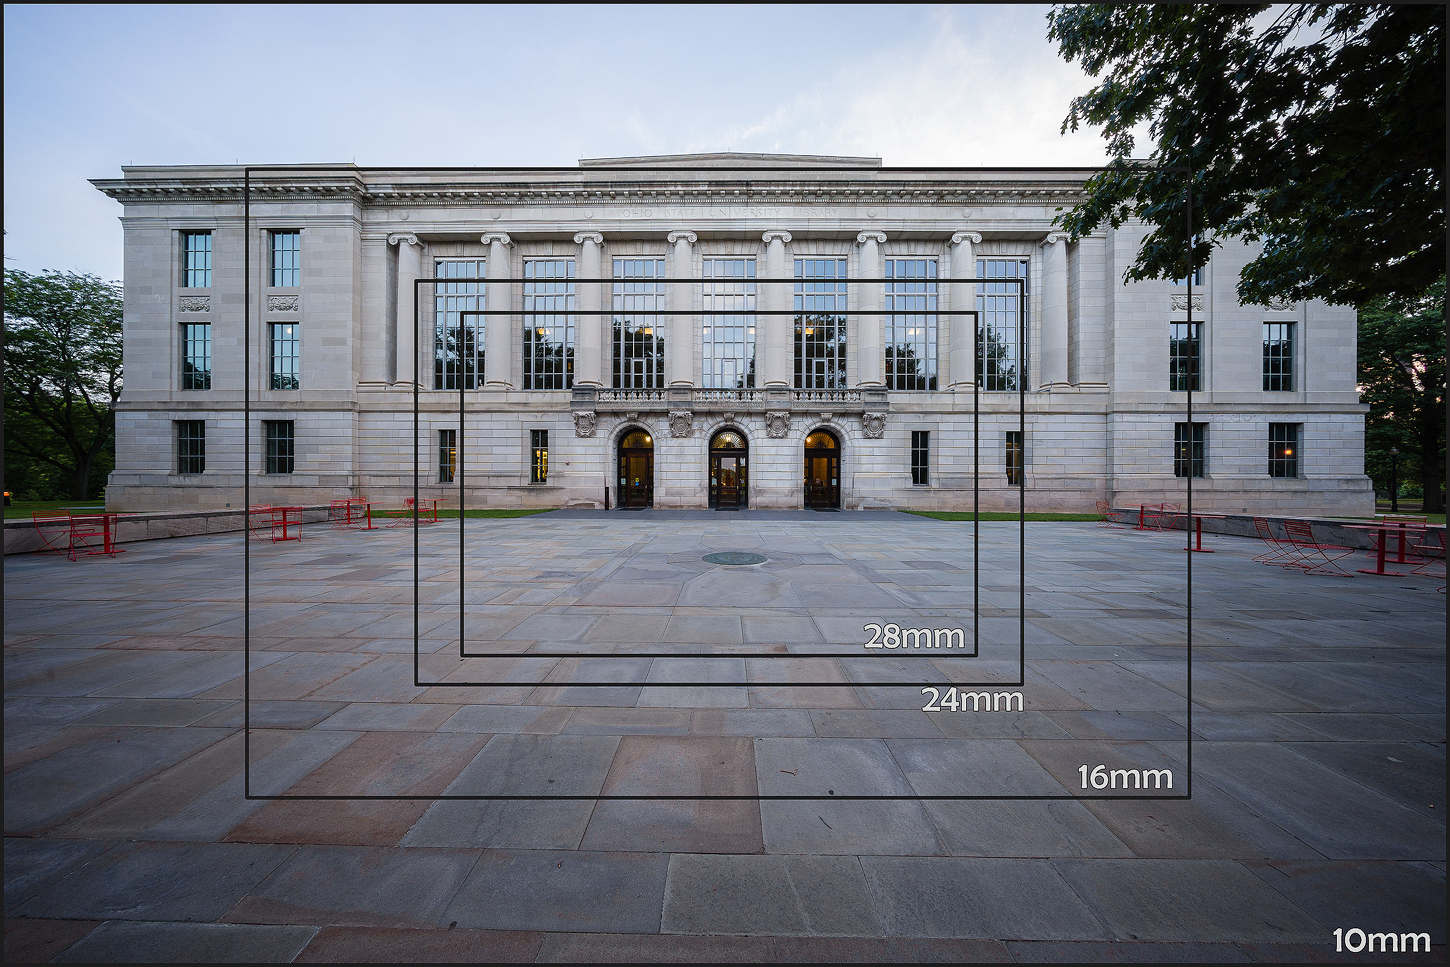 Fields of View of the 10mm compared to other wide-angle focal lengths (click to enlarge)